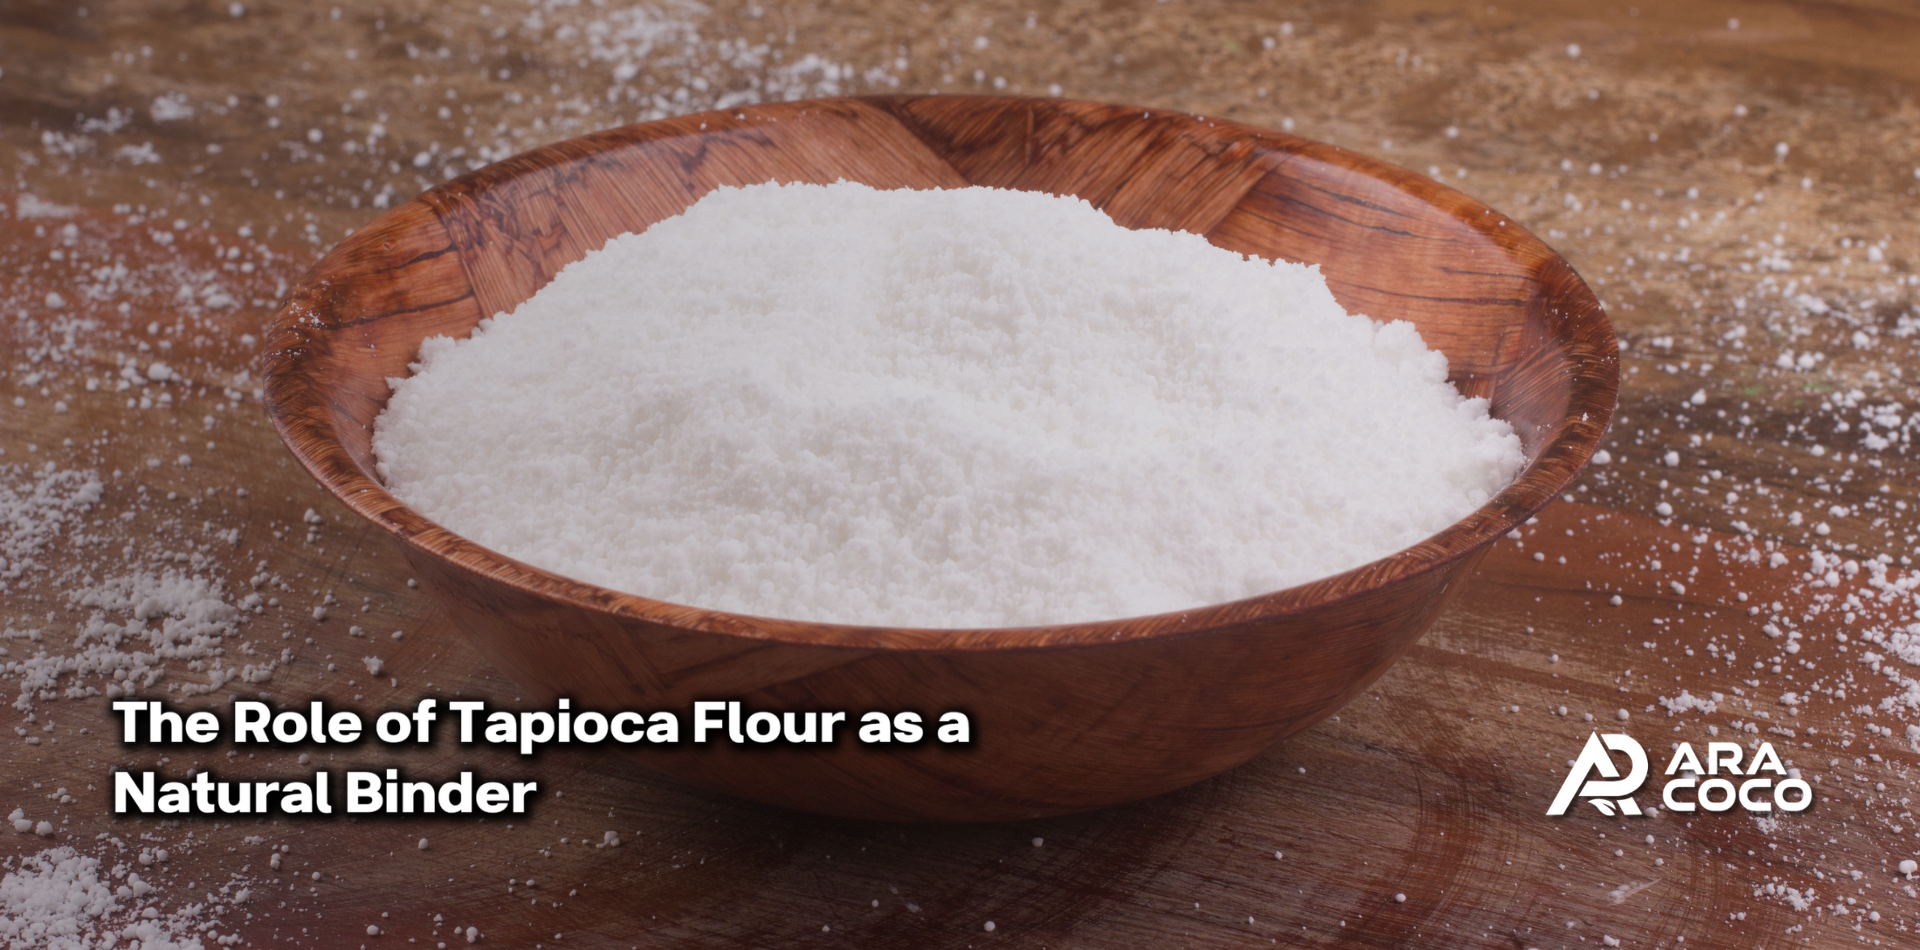 The Role of Tapioca Flour as a Natural Binder